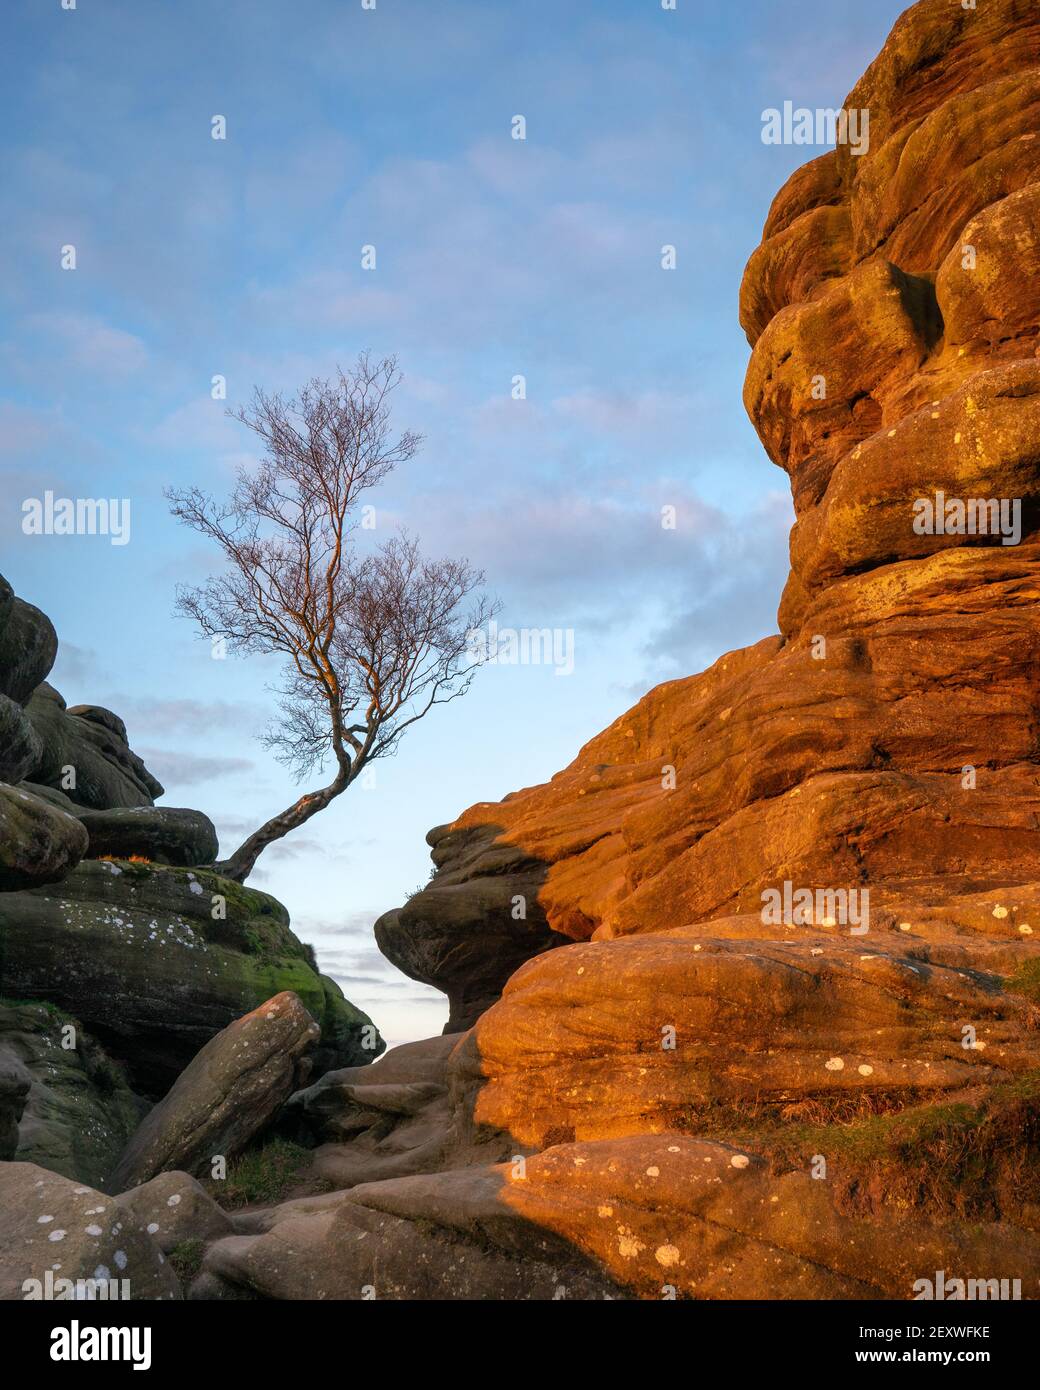 The weathered gritstone formations at Brimham Rocks glow red as the rising sun highlights the textures alongside a lone tree. Stock Photo